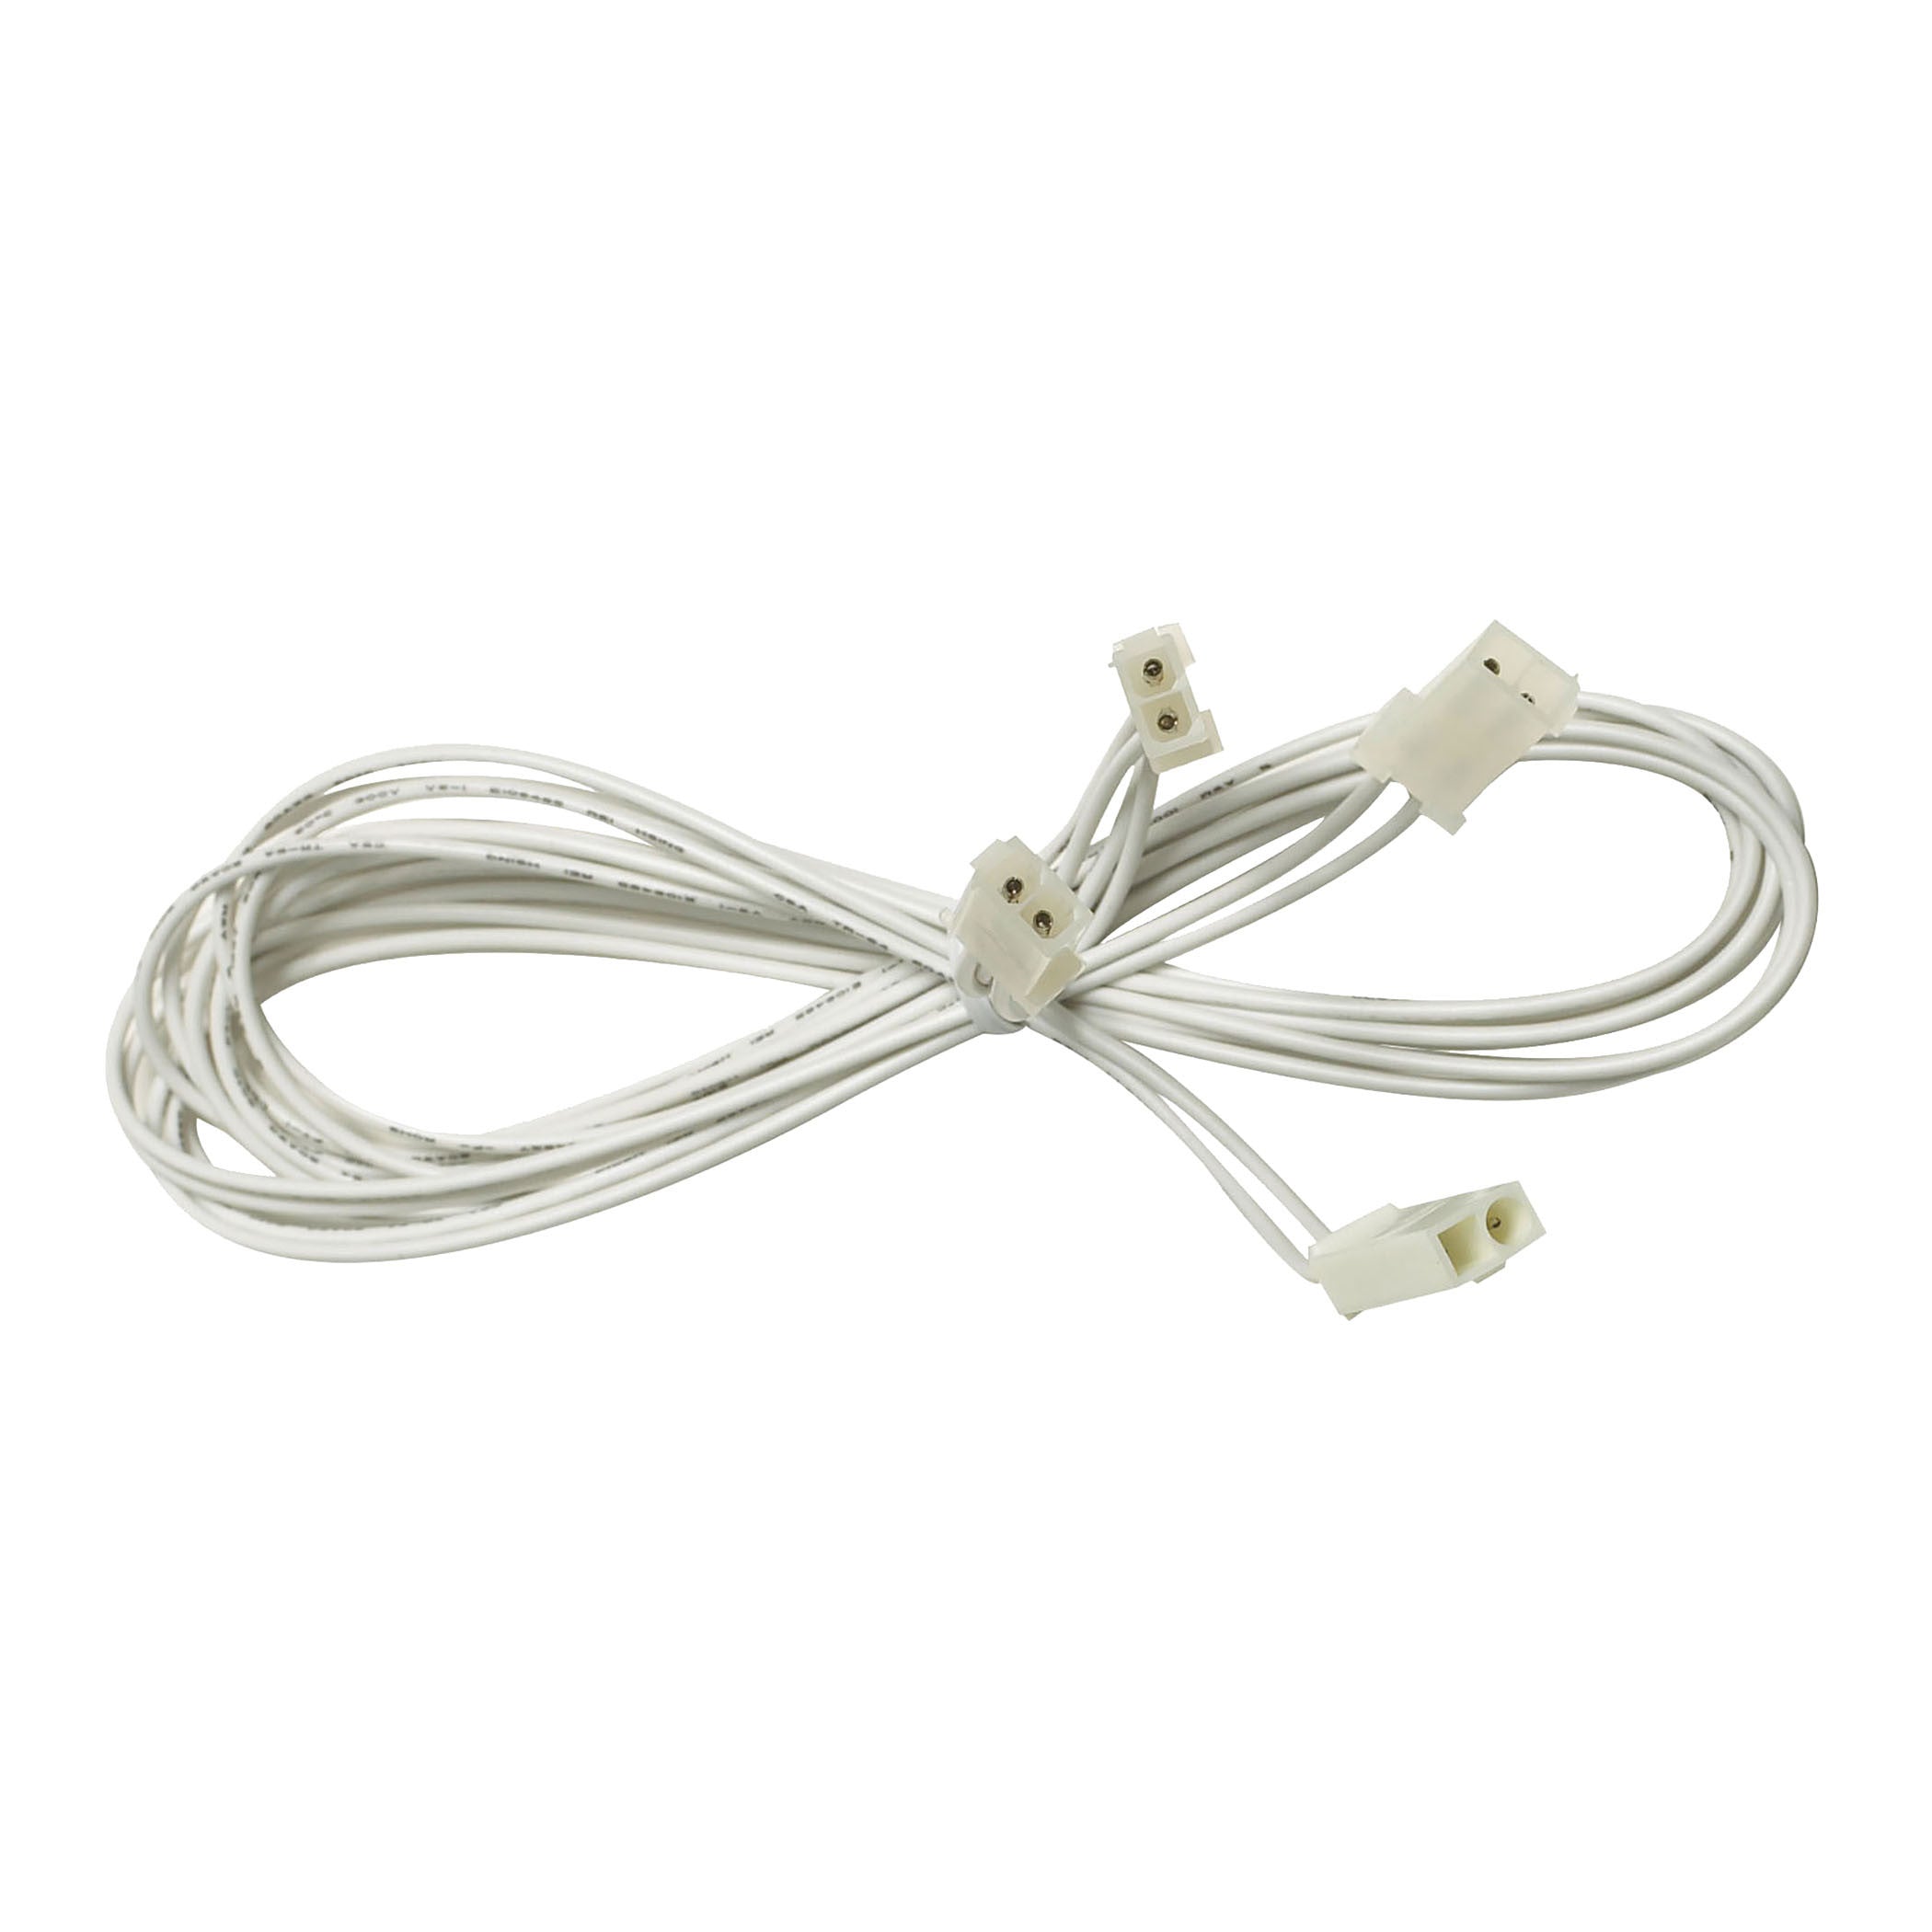 Alico Ac2a 5-foot Harness With 20-inch Leads